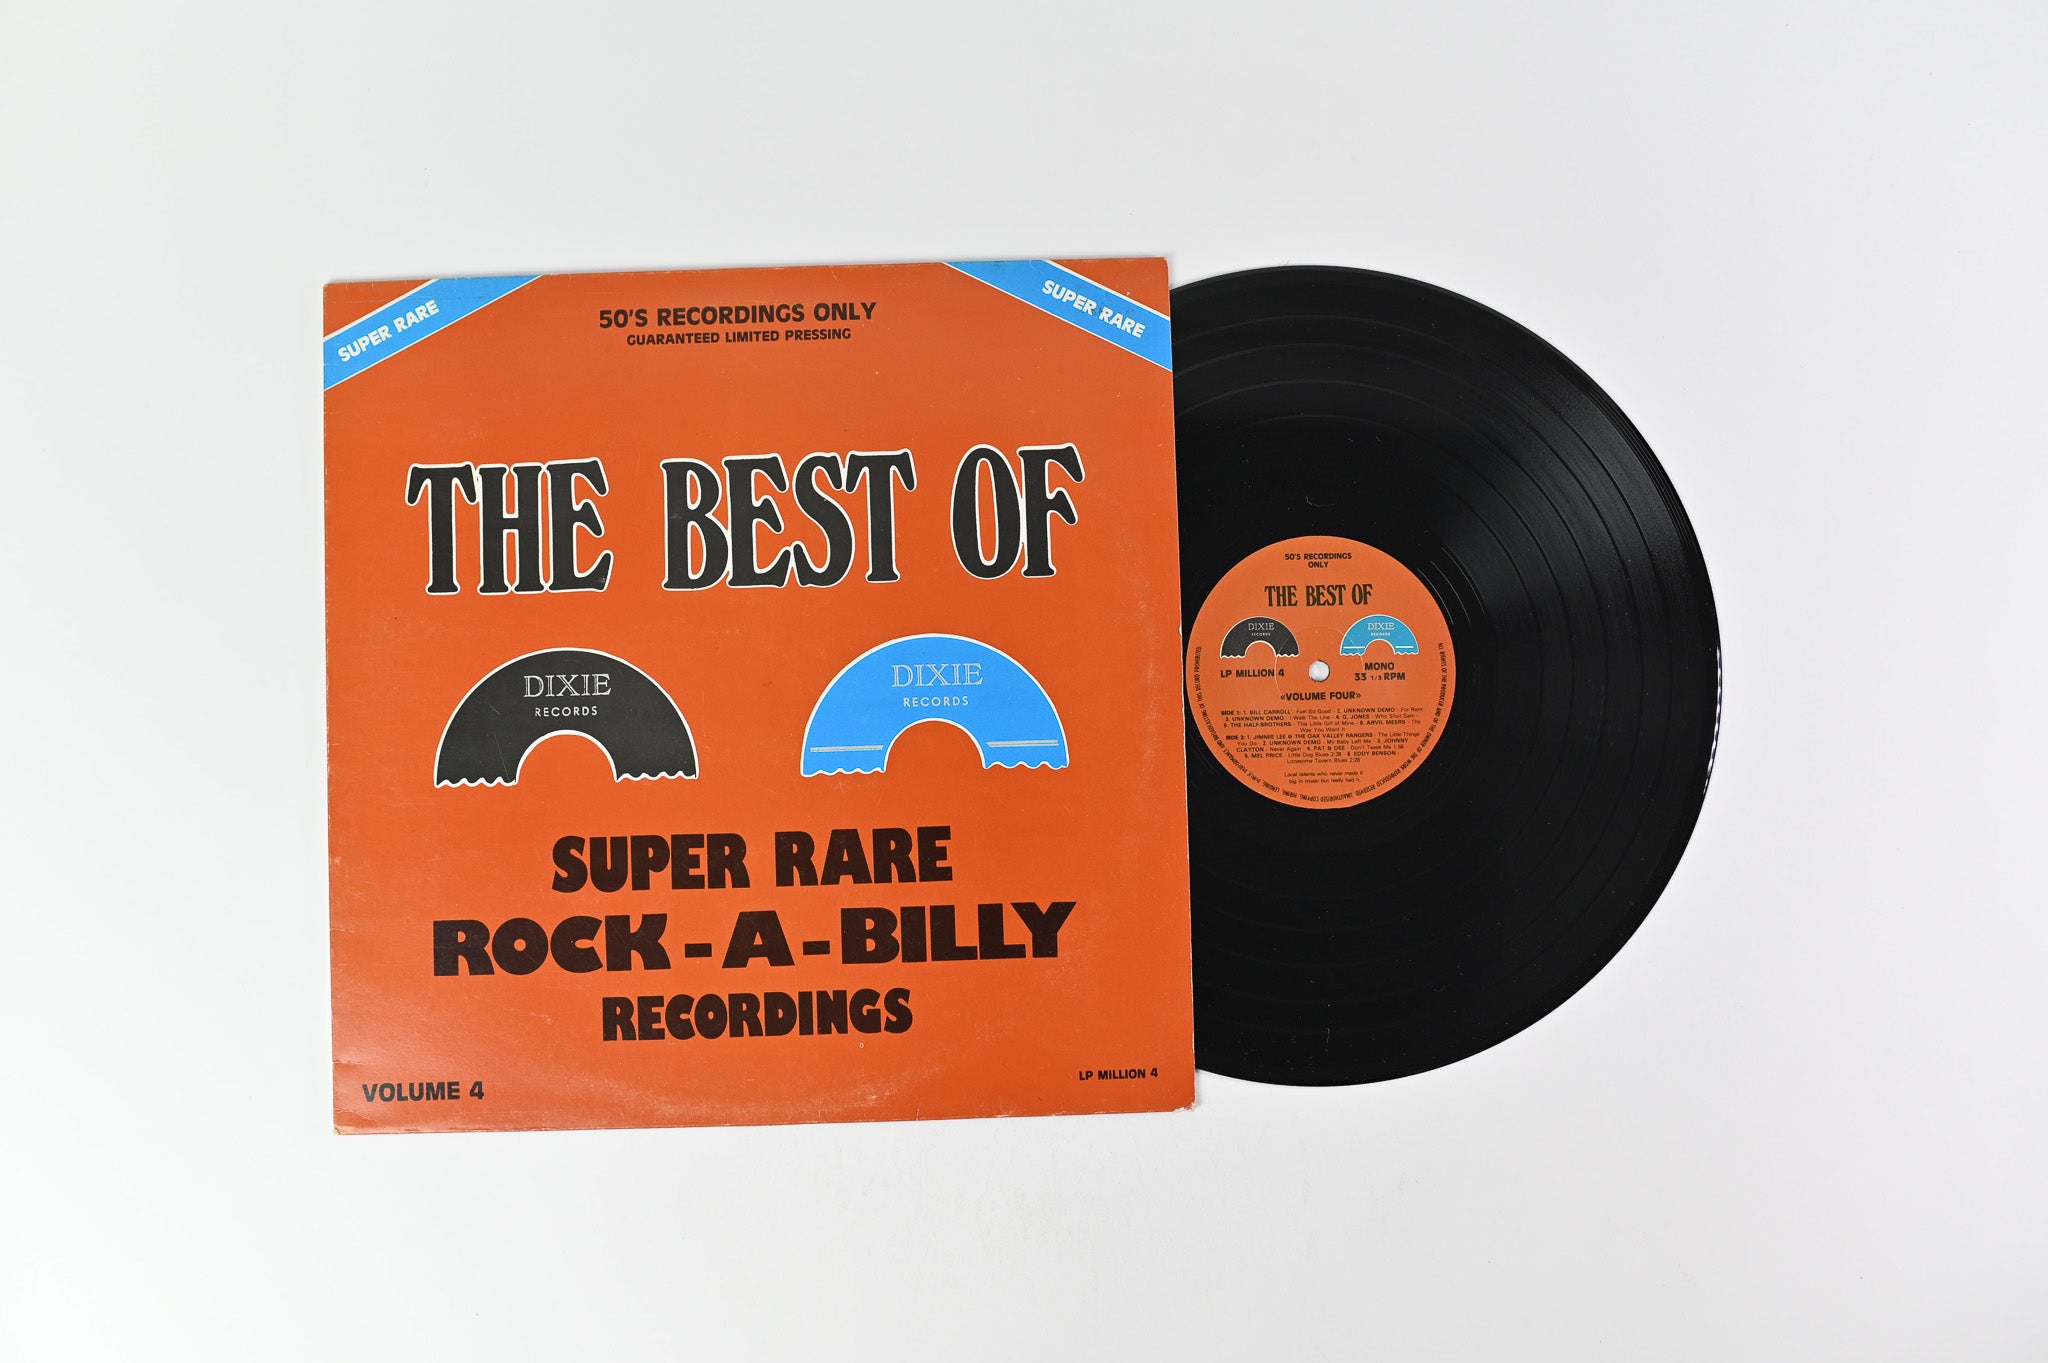 Various - The Best Of Dixie - Super Rare Rock-A-Billy Recordings Vol. 4 on Dixie Records